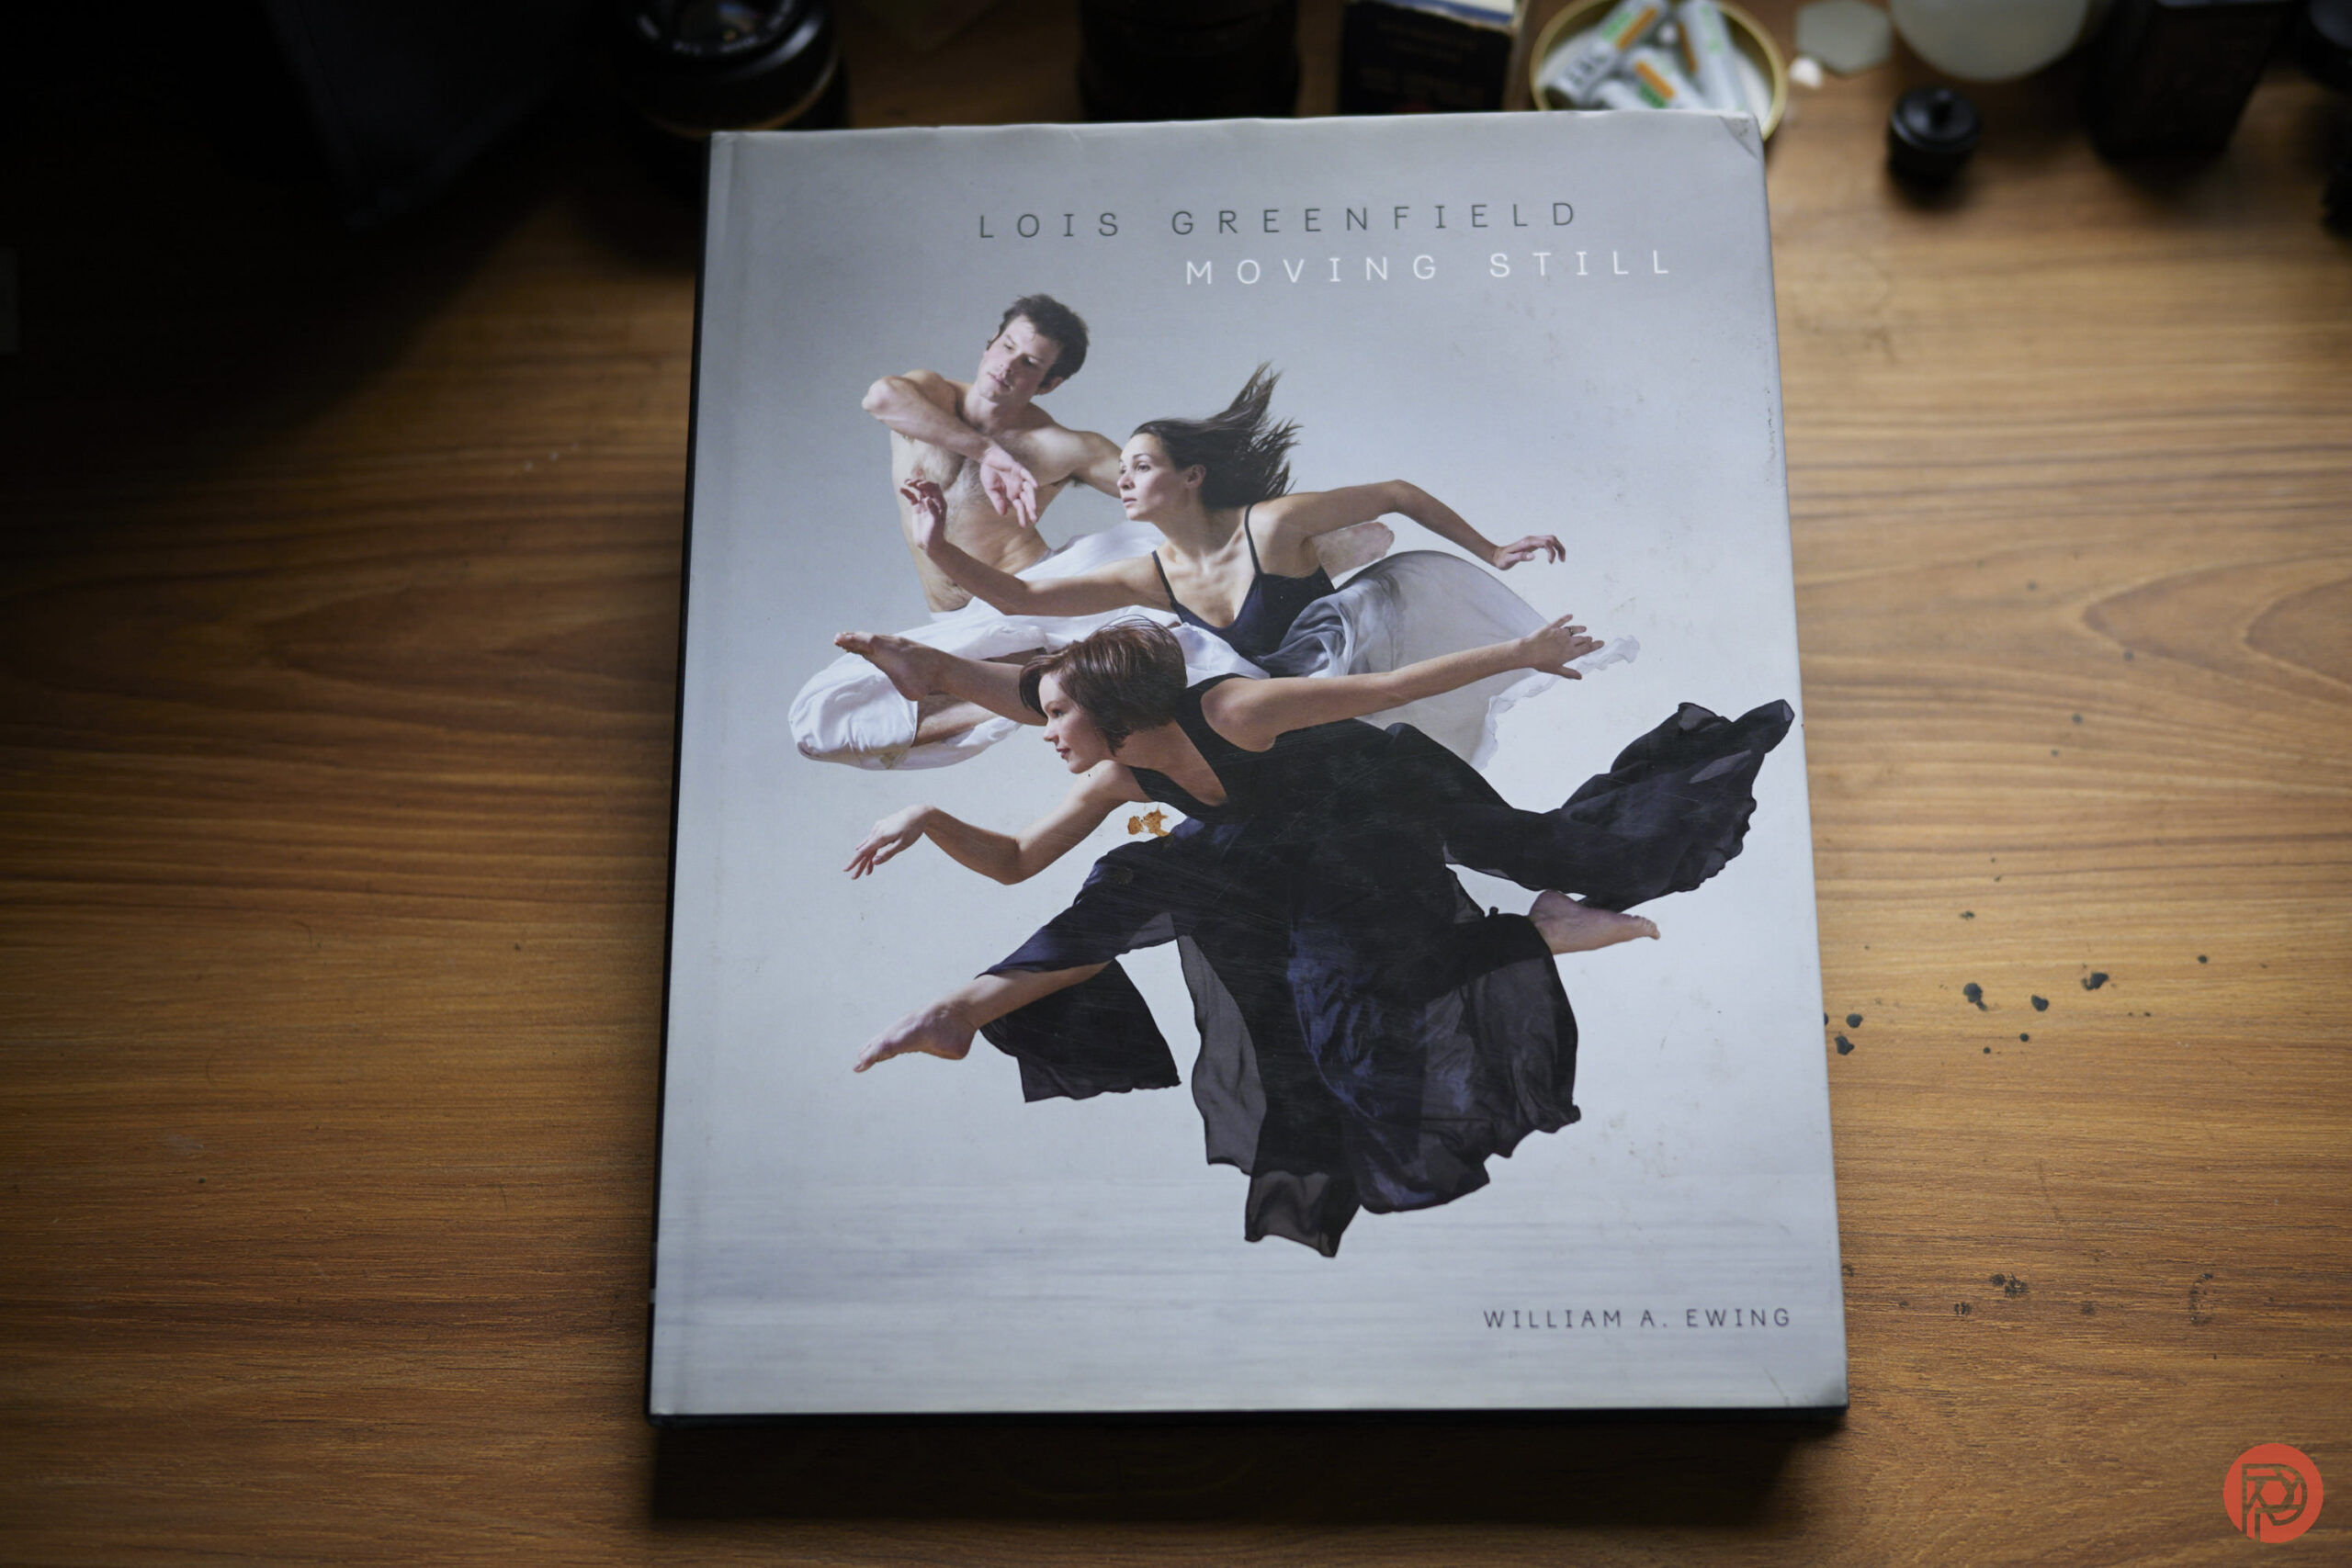 Chris Gampat The Phoblographer Lois Greenfield Moving Still book review product 2.81-250s400